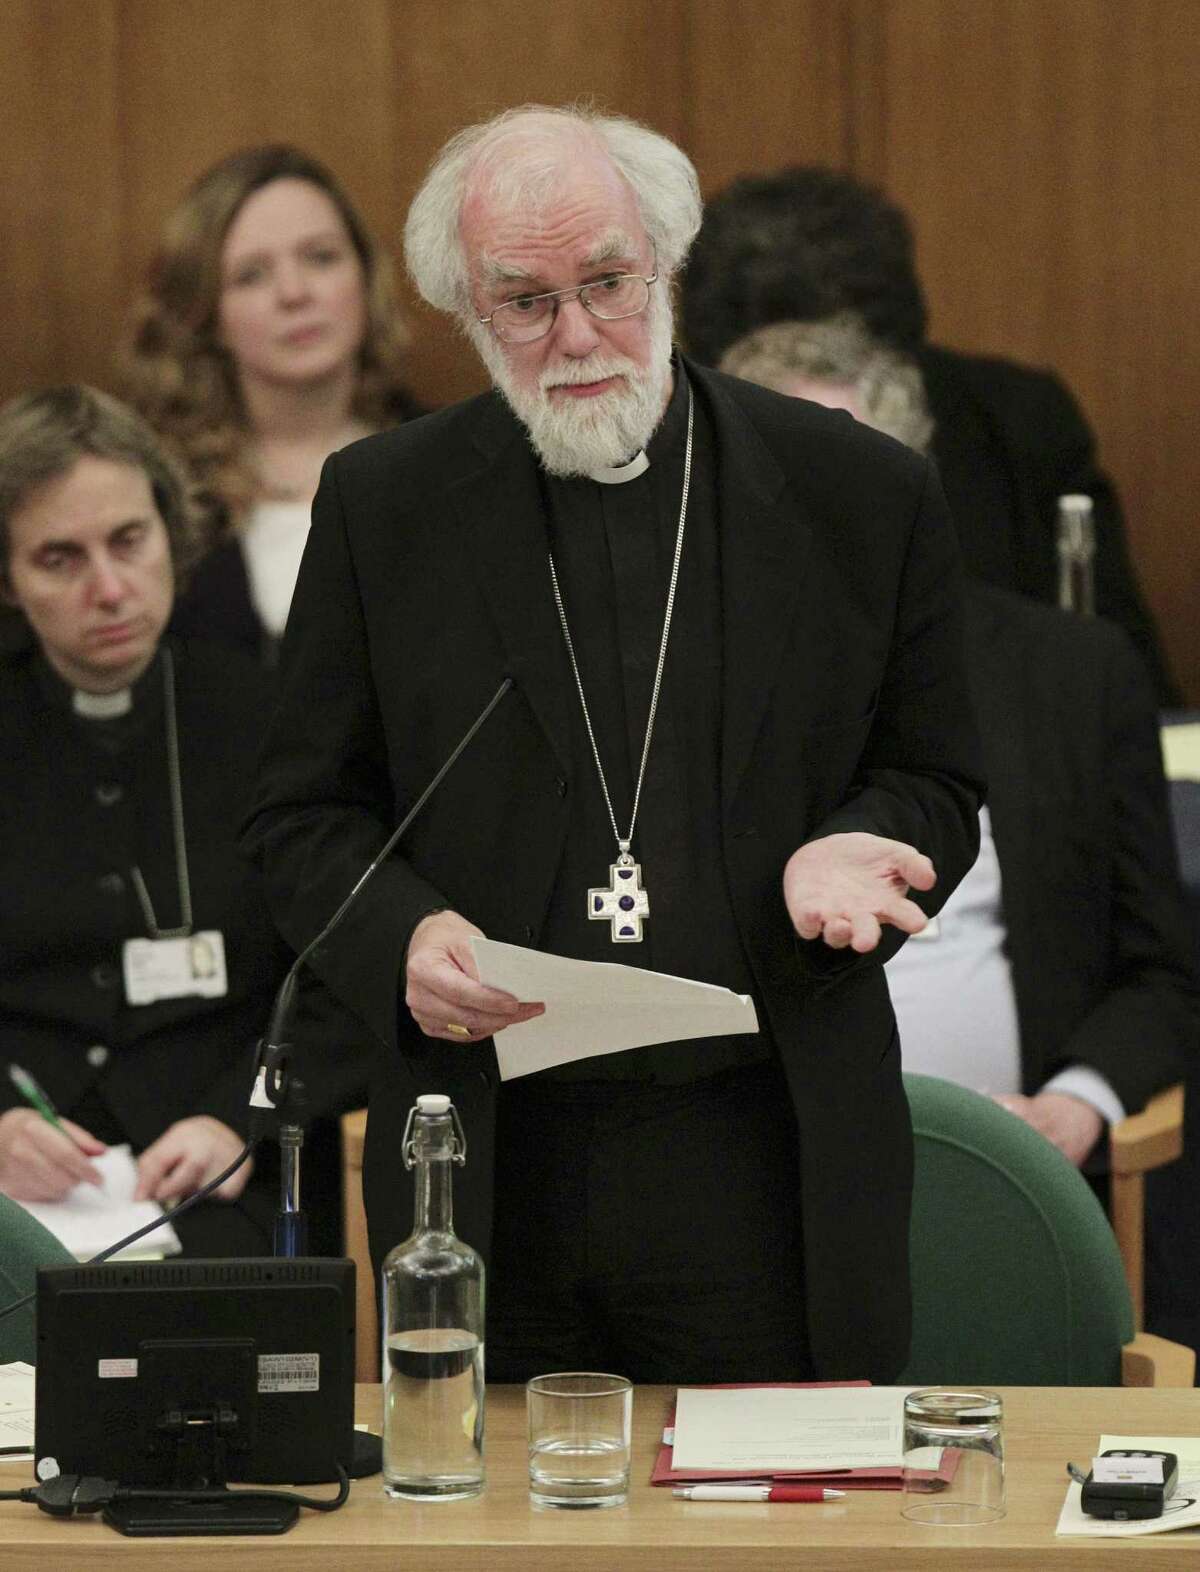 Dr Rowan Williams, centre, the outgoing Archbishop of Canterbury speaks during a meeting of the General Synod of the Church of England in central London, Tuesday, Nov. 20, 2012, - where a vote on whether to give final approval to legislation introducing the first women bishops will take place. The leader of the Church of England appealed for harmony among the faithful as it went into a vote Tuesday on whether to allow women to serve as bishops, a historic decision that comes after decades of debate. The push to muster a two-thirds majority among lay members of the General Synod is expected to be close, with many on both sides unsatisfied with a compromise proposal to accommodate individual parishes which spurn female bishops. (AP Photo/PA, Yui Mok, Pool)